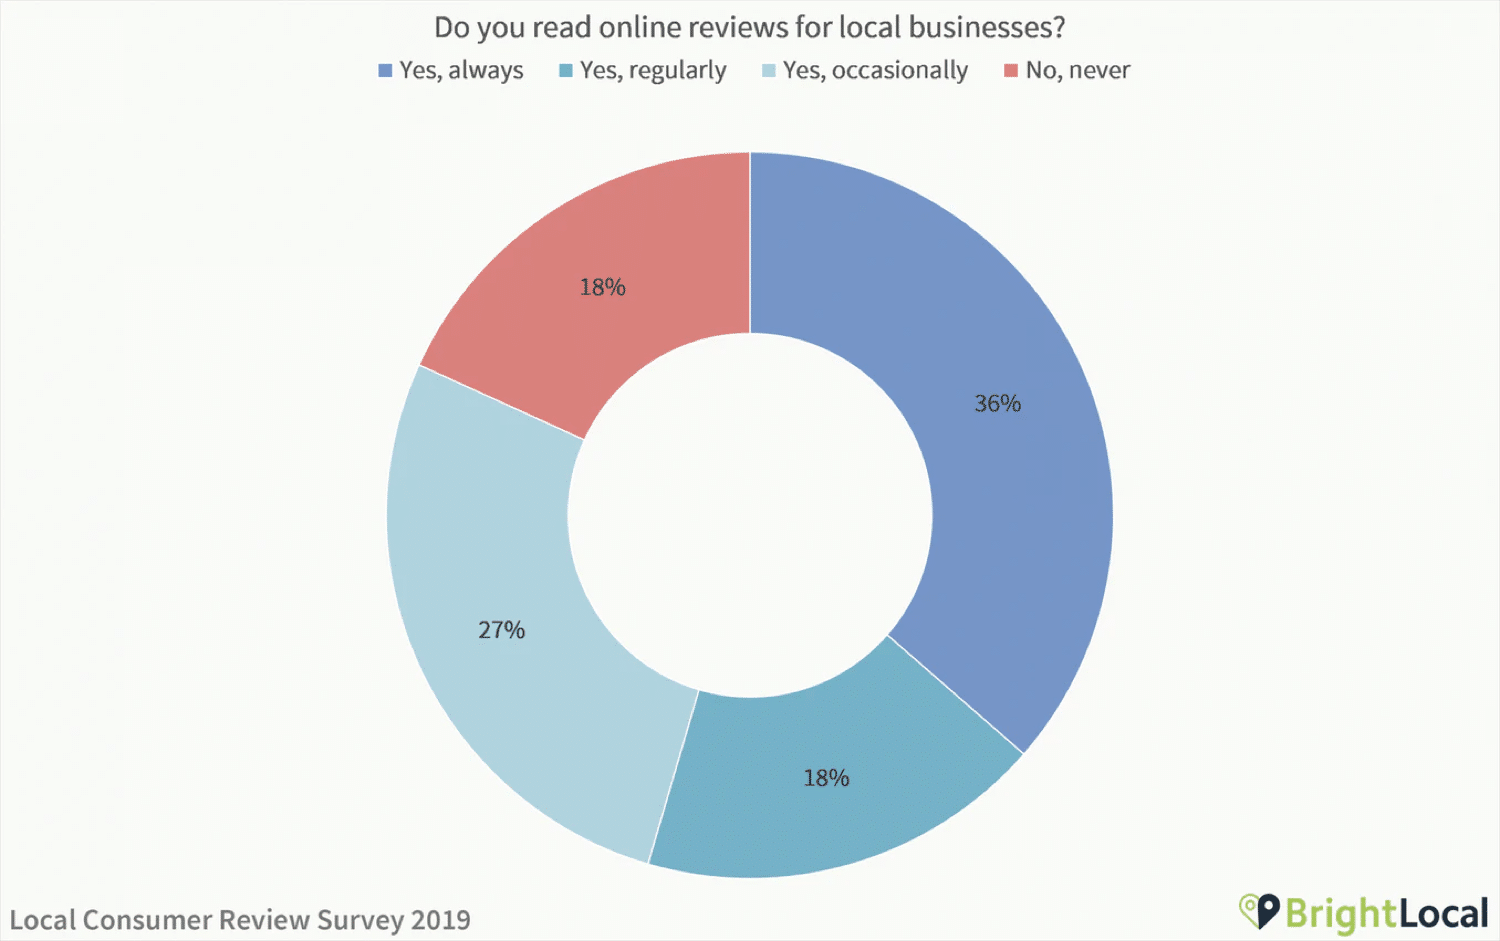 Results from a local consumer review study